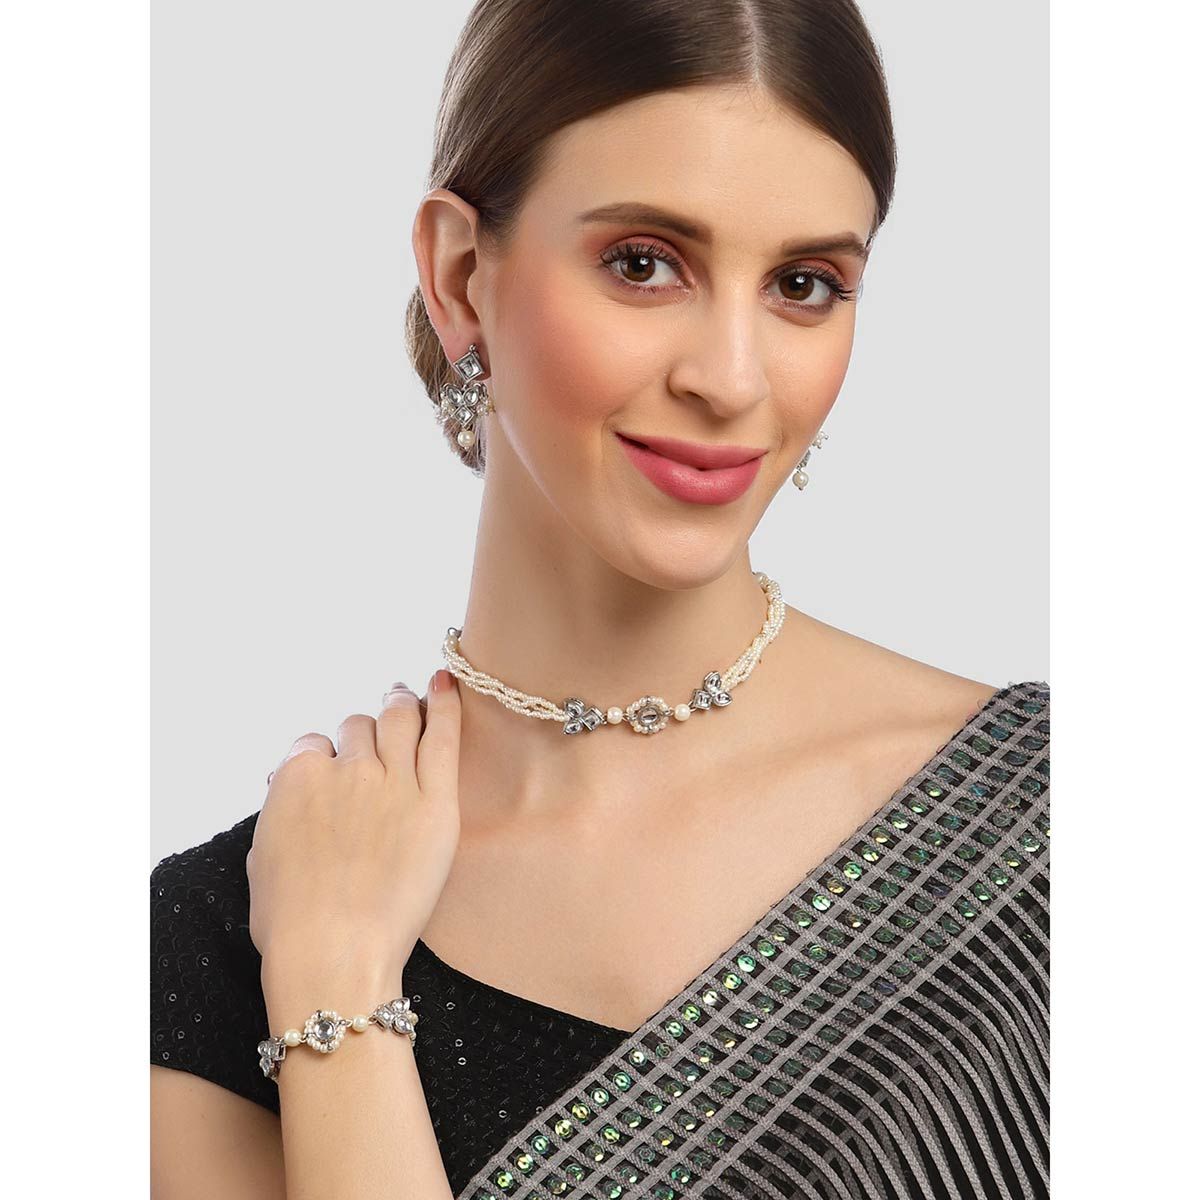 Karatcart Handcrafted Oxidized Silver Necklace with Earrings and Bracelet  Set of 3 Buy Karatcart Handcrafted Oxidized Silver Necklace with Earrings  and Bracelet Set of 3 Online at Best Price in India  Nykaa